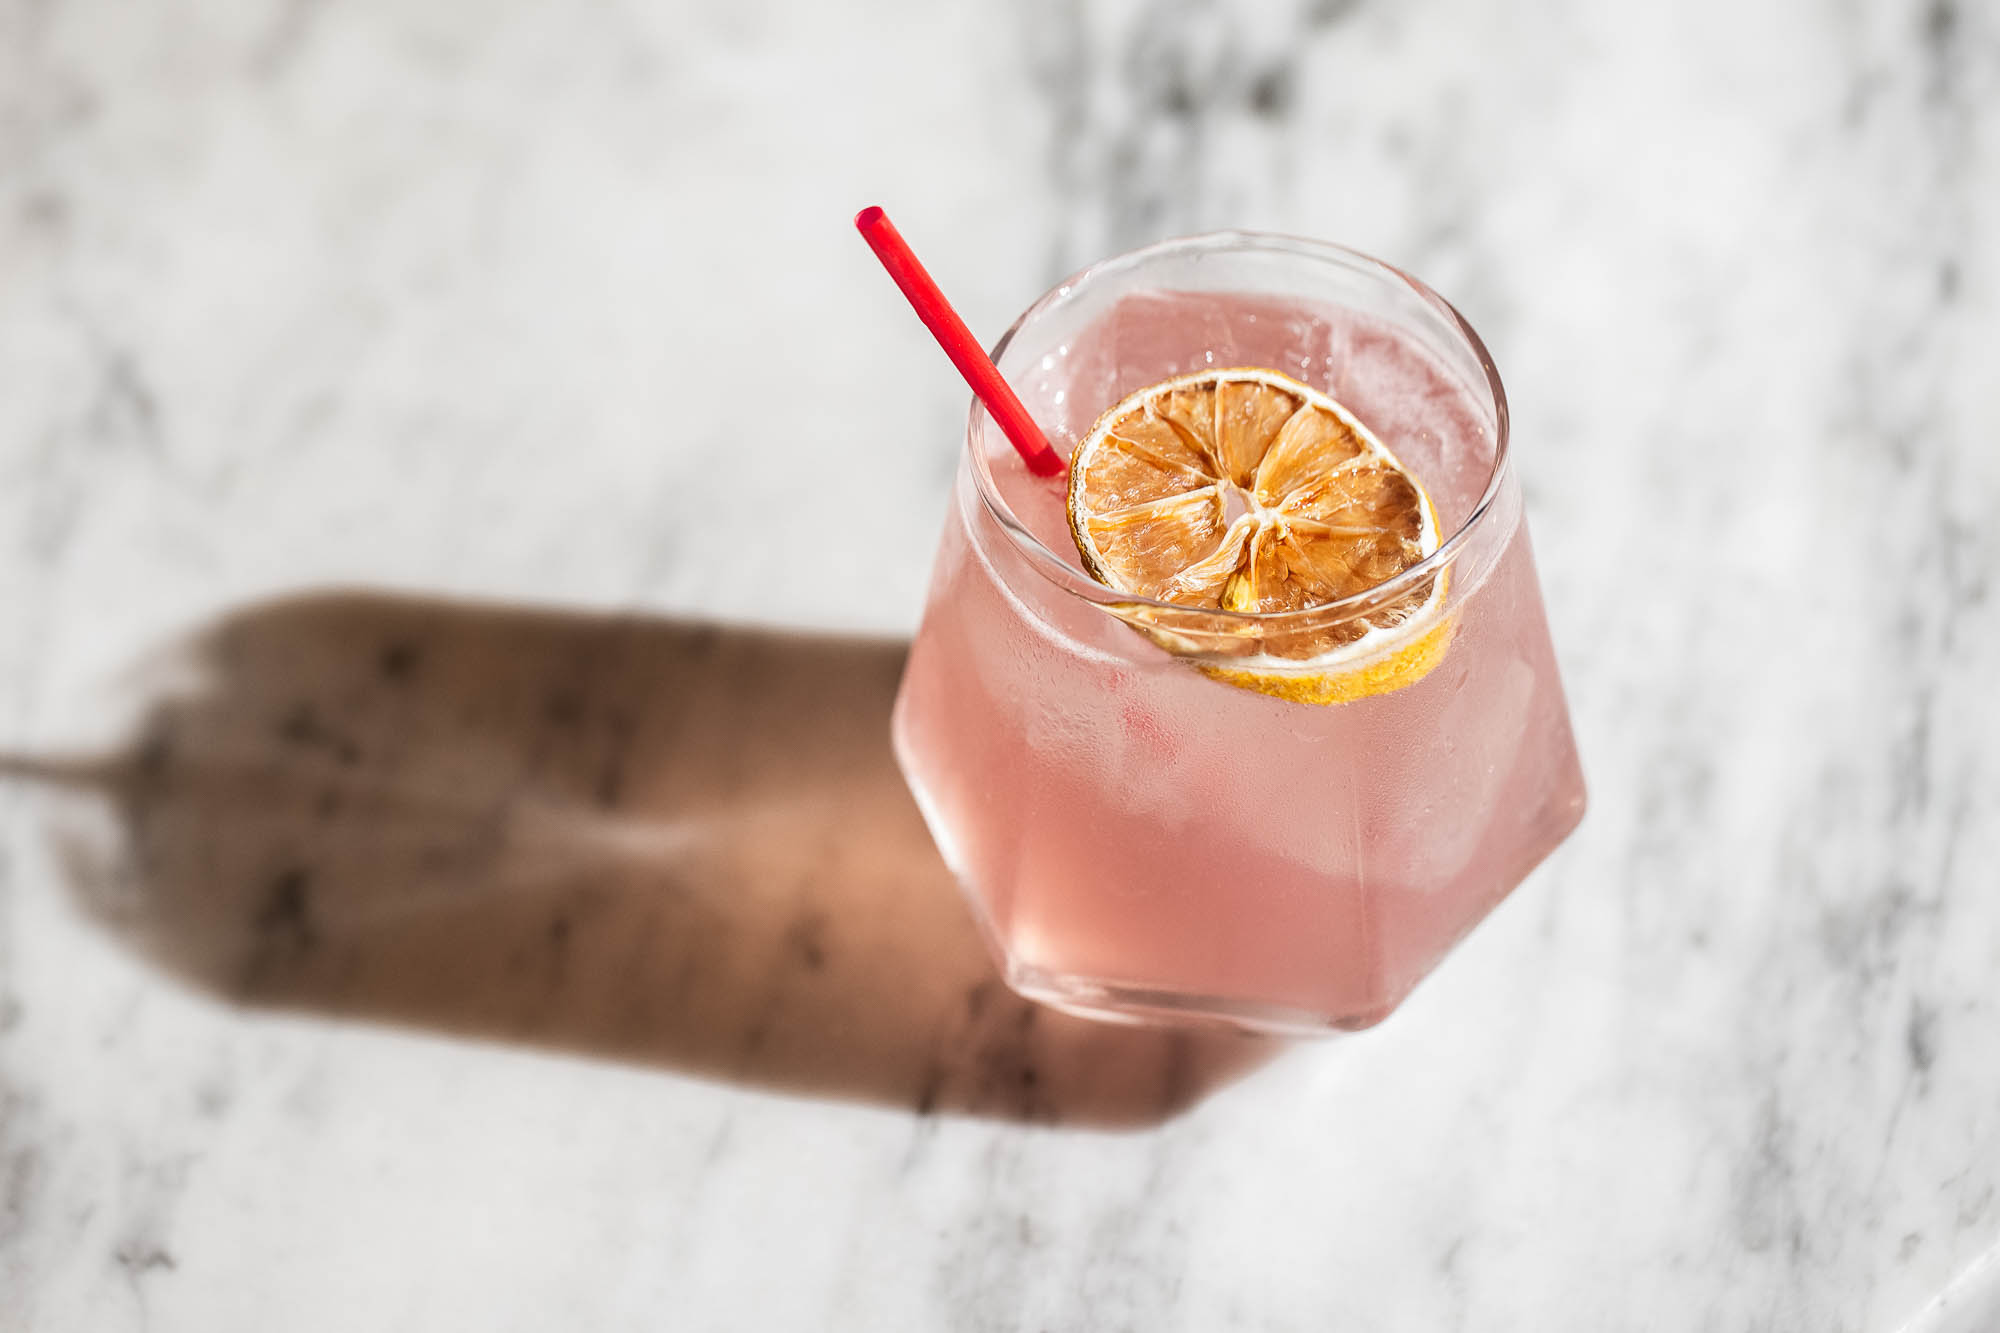 A pink colored Summer Madness cocktail, garnished with a dehydrated lemon wheel